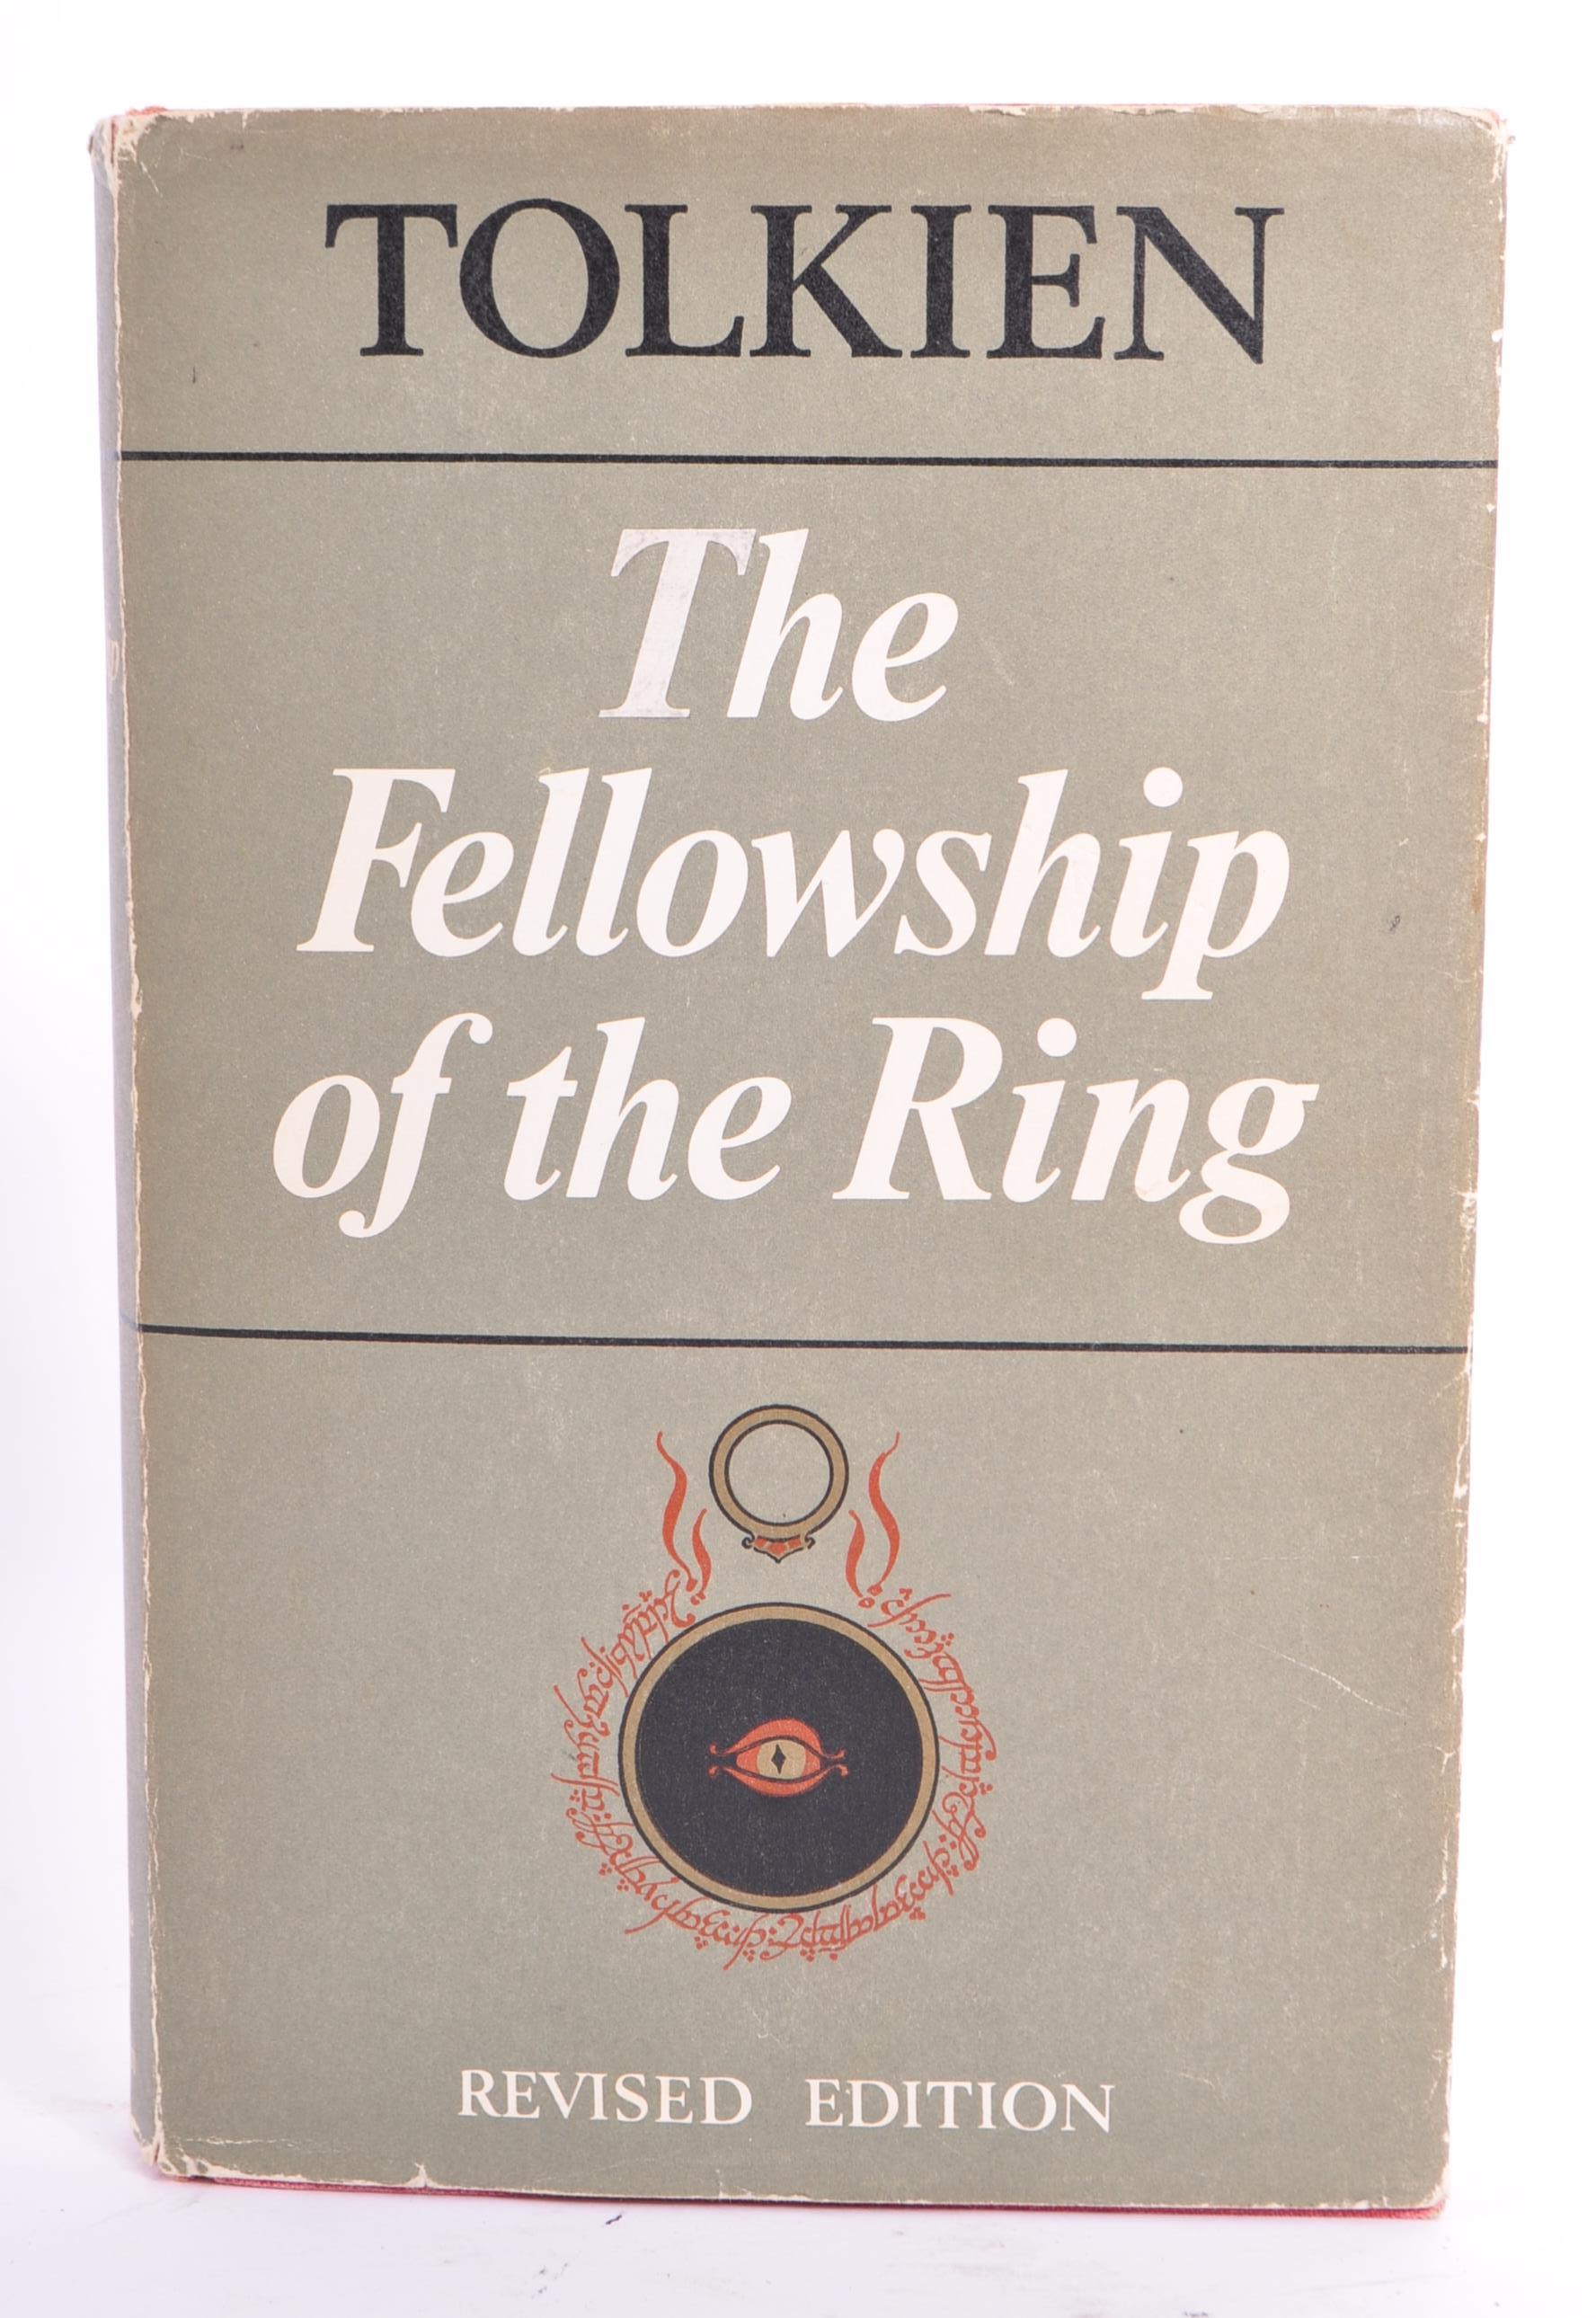 J. R. R. TOLKIEN - LORD OF THE RINGS - THREE 1960S HARDBACK BOOKS - Image 2 of 16